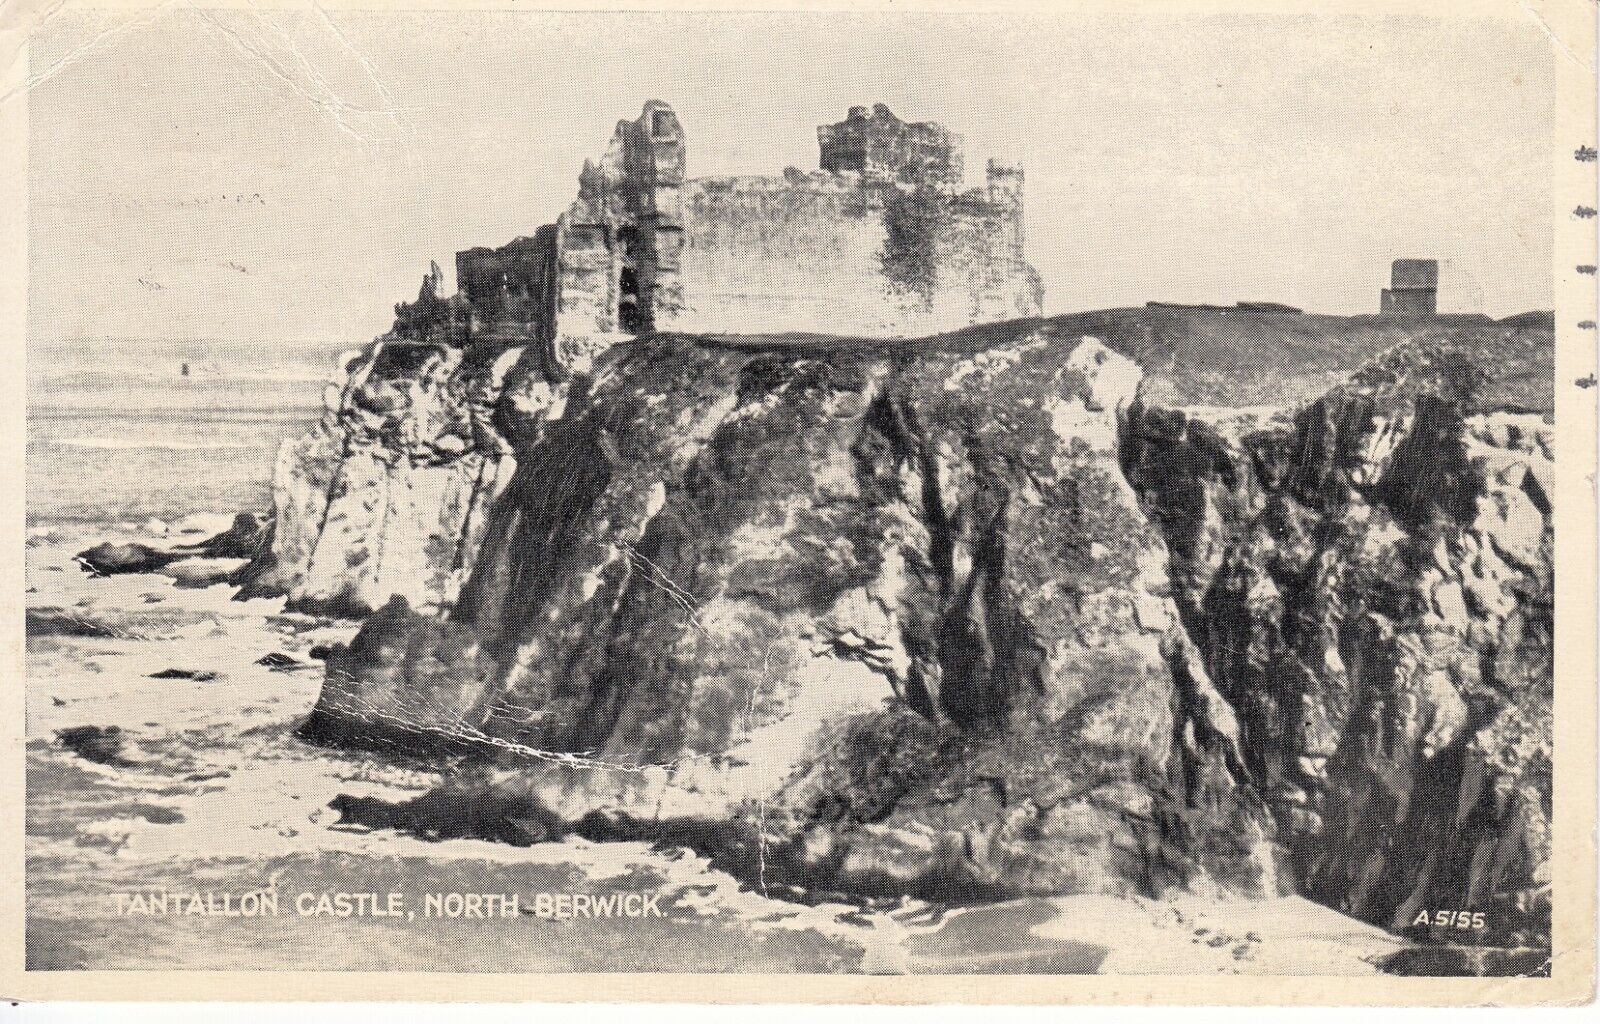 House Clearance - P'card Tantallon Castle, North Berwick (Valentine No. A5155, 1937). Posted 1955